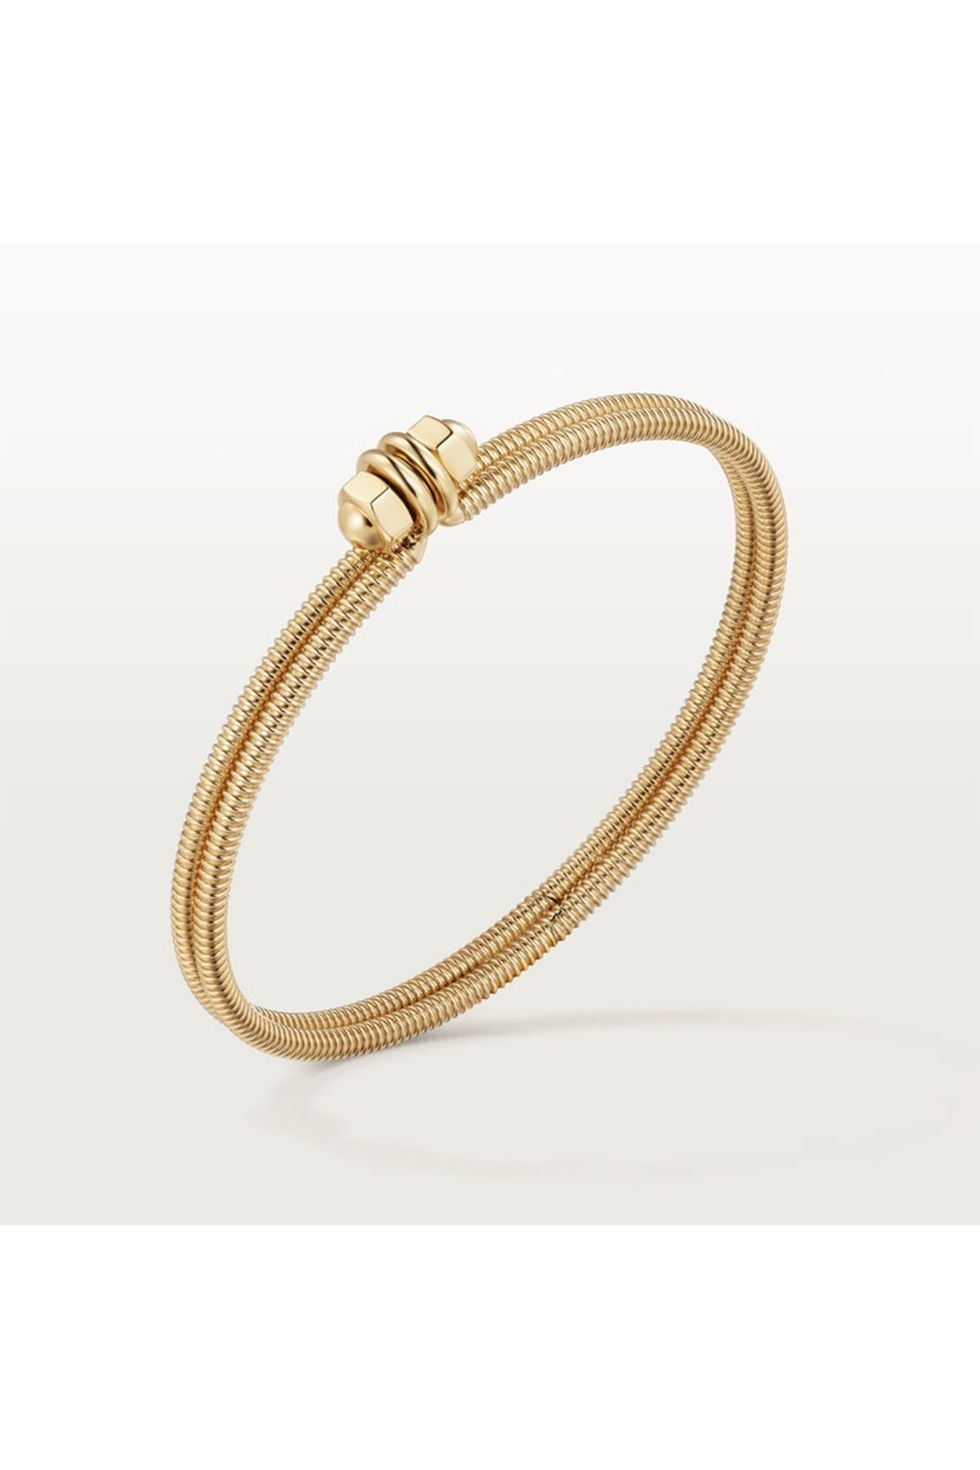 Shop Luxury-Inspired Bangle Bracelets for A High-end Look Gold